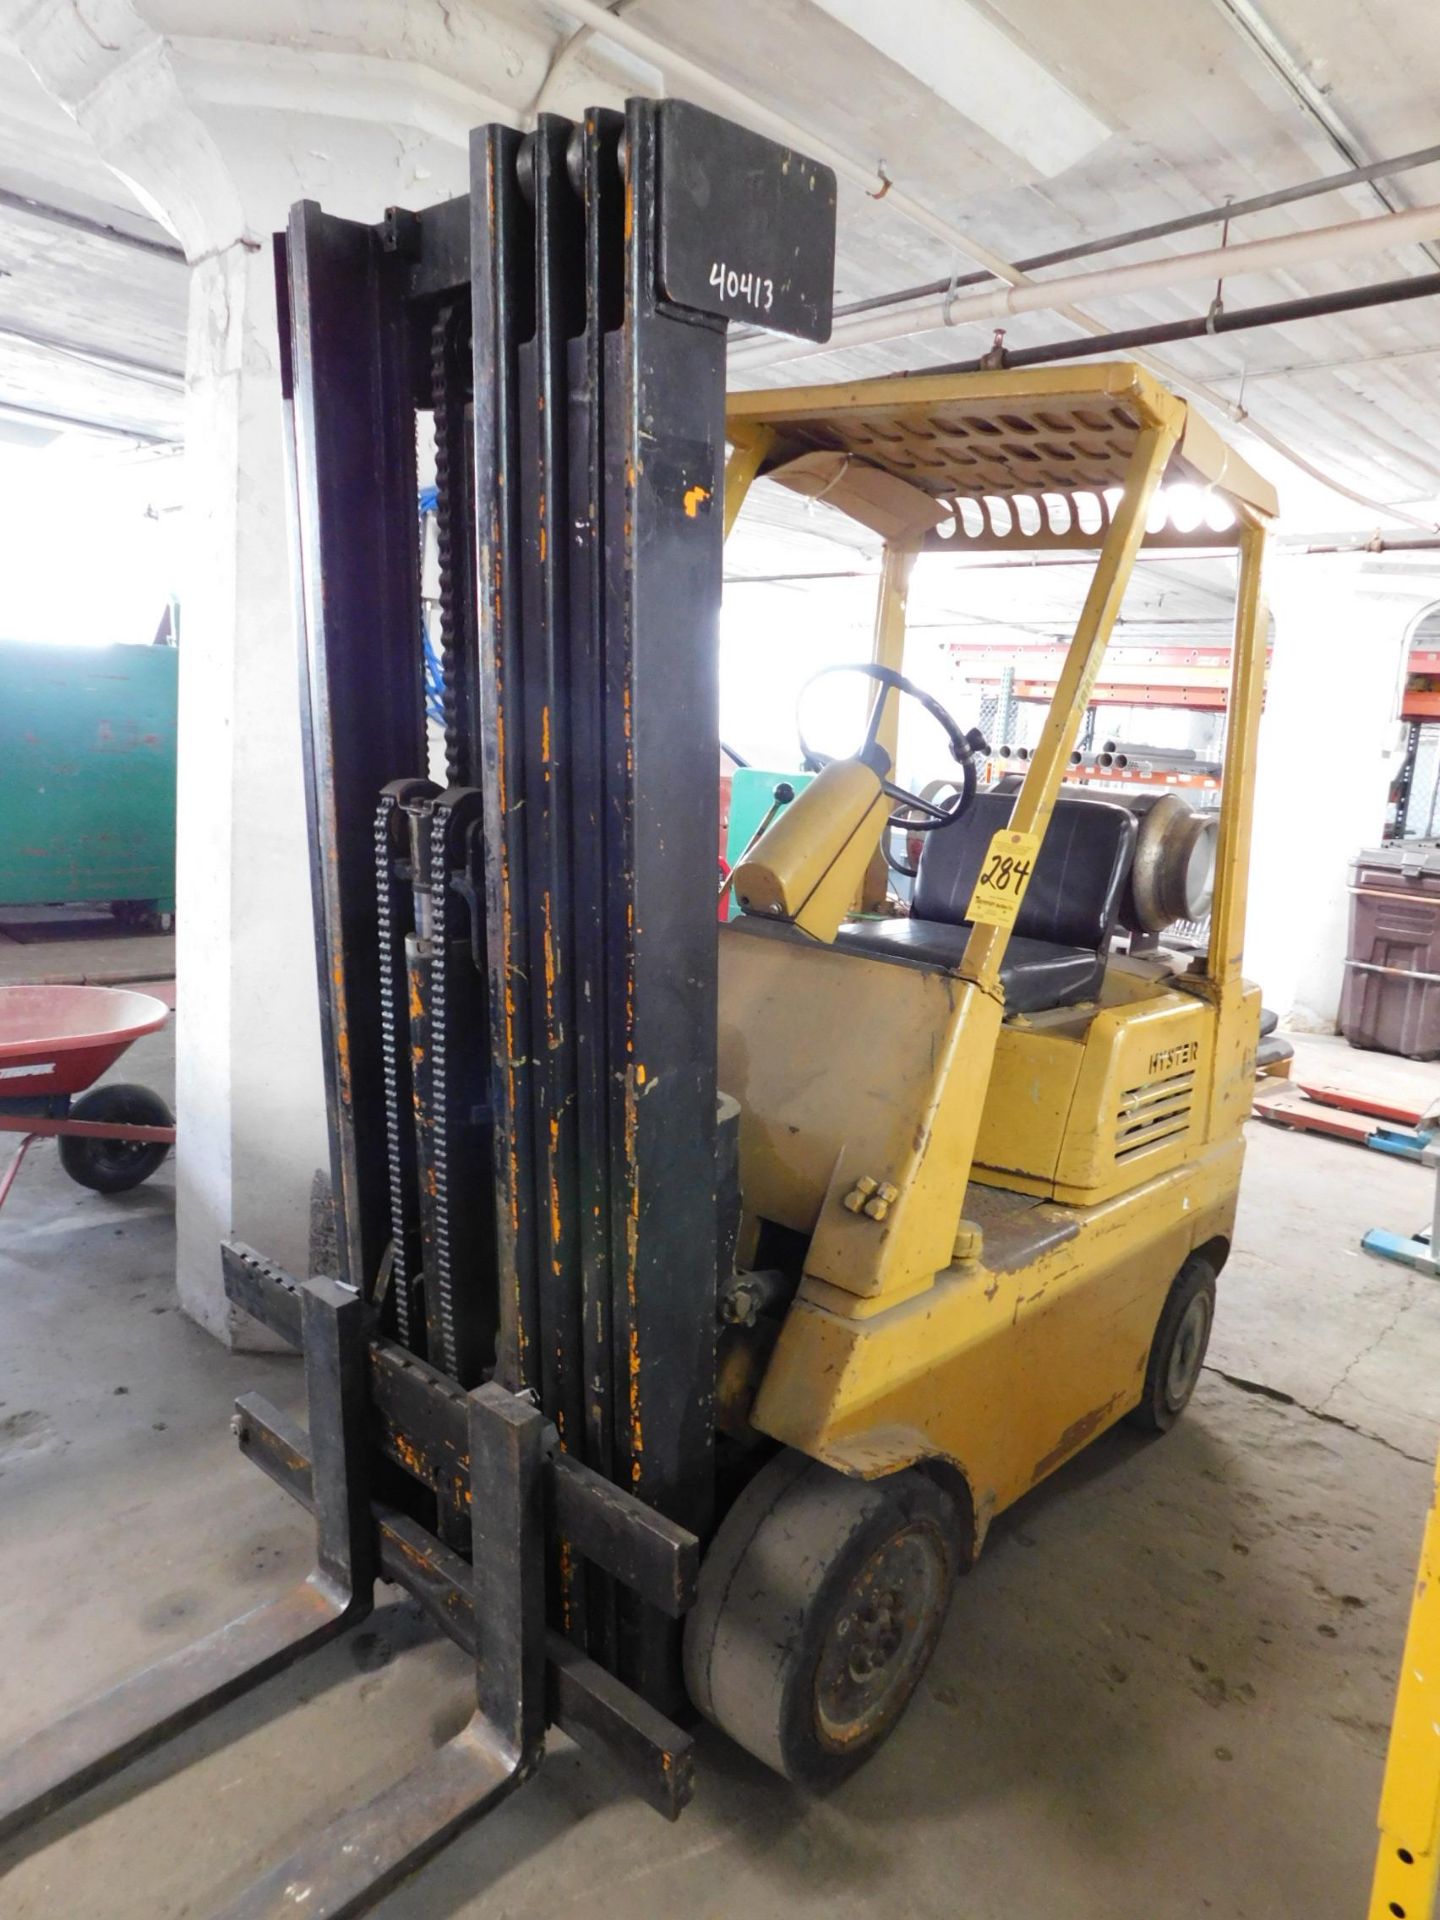 Hyster Model S50E Forklift sn P002D06272Z, 3,750lb.cap.and 24" Load Center, LP, 4 Stage Mast, 4"